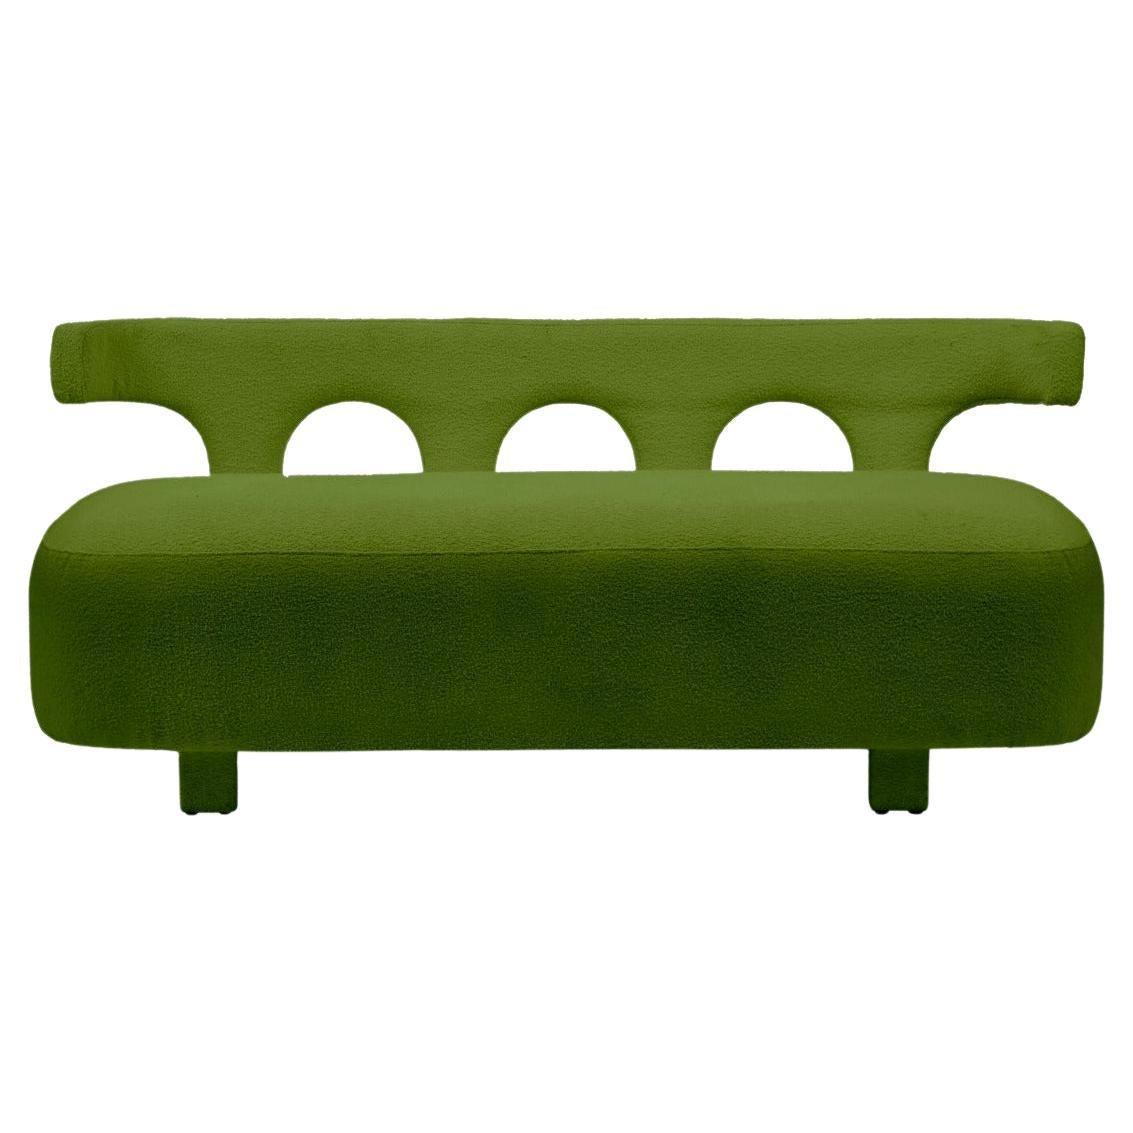 Olive Green Curvy Upholstered Sofa Inspired by Egypt's Nubian Architecture